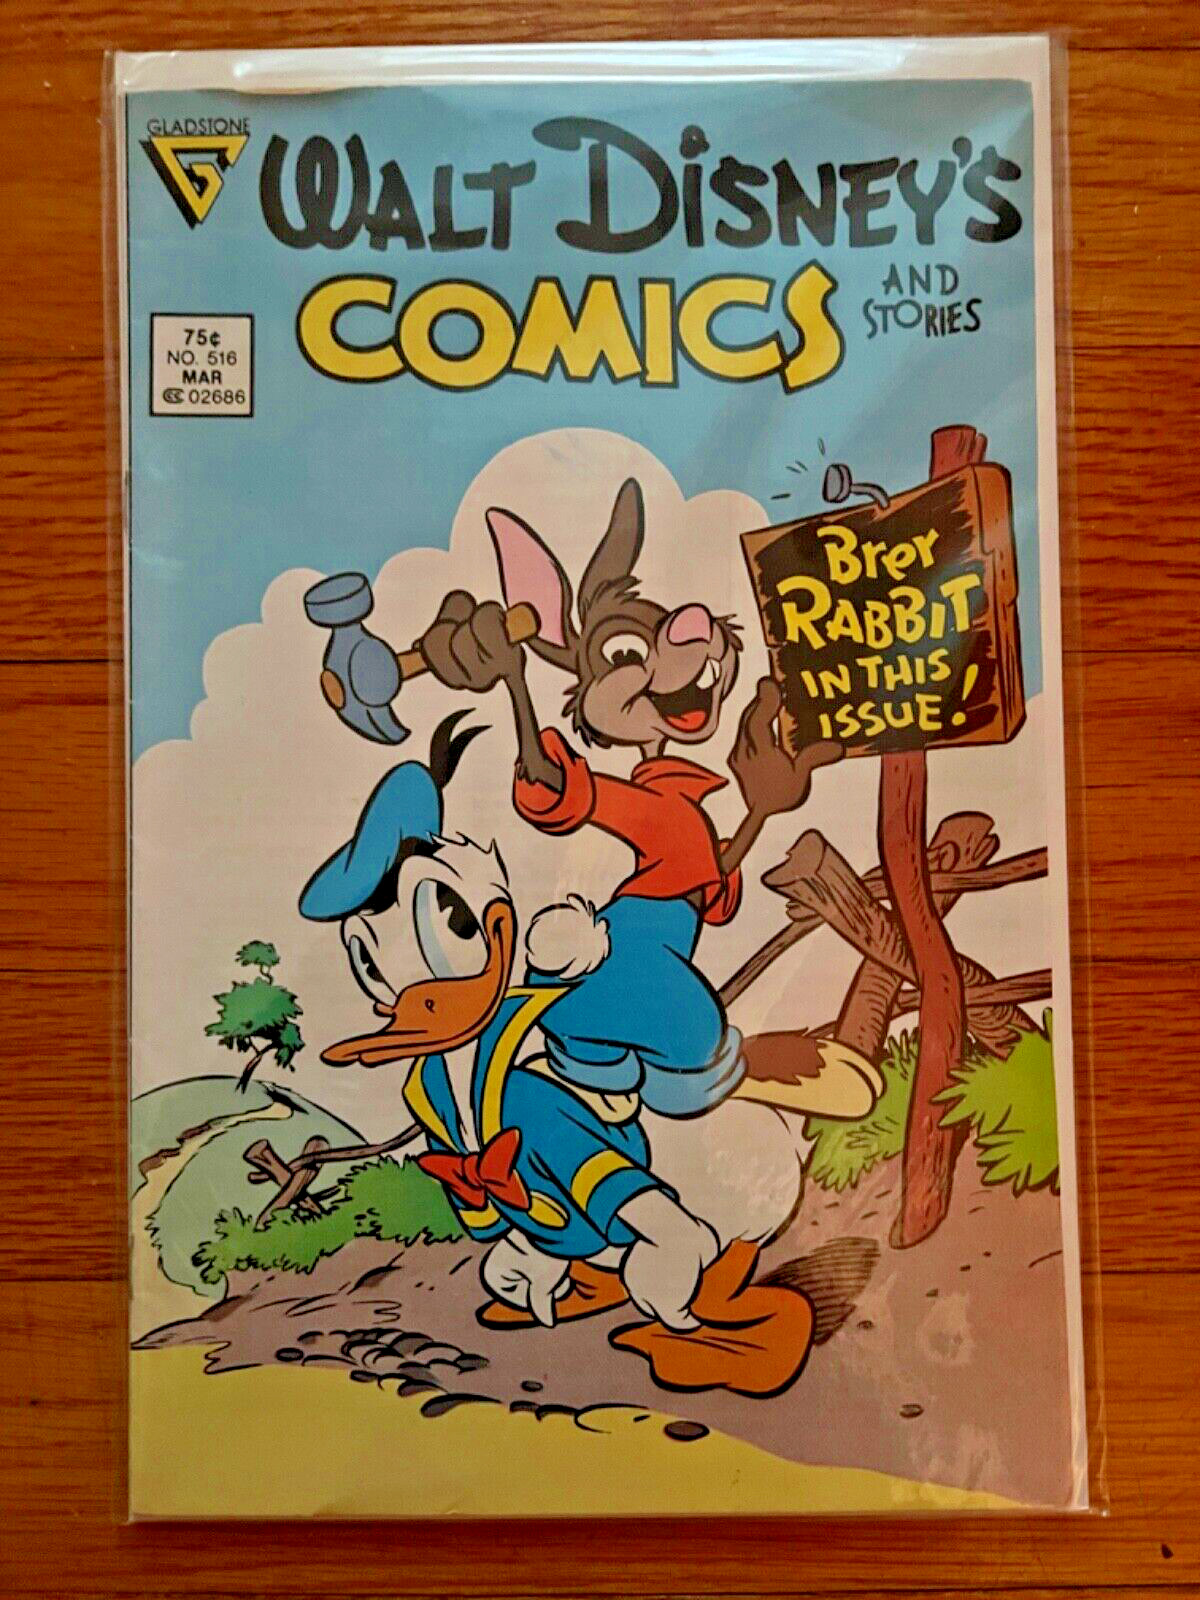 1987 Gladstone WALT DISNEY’s COMICS AND STORIES Donald Duck Issue #516